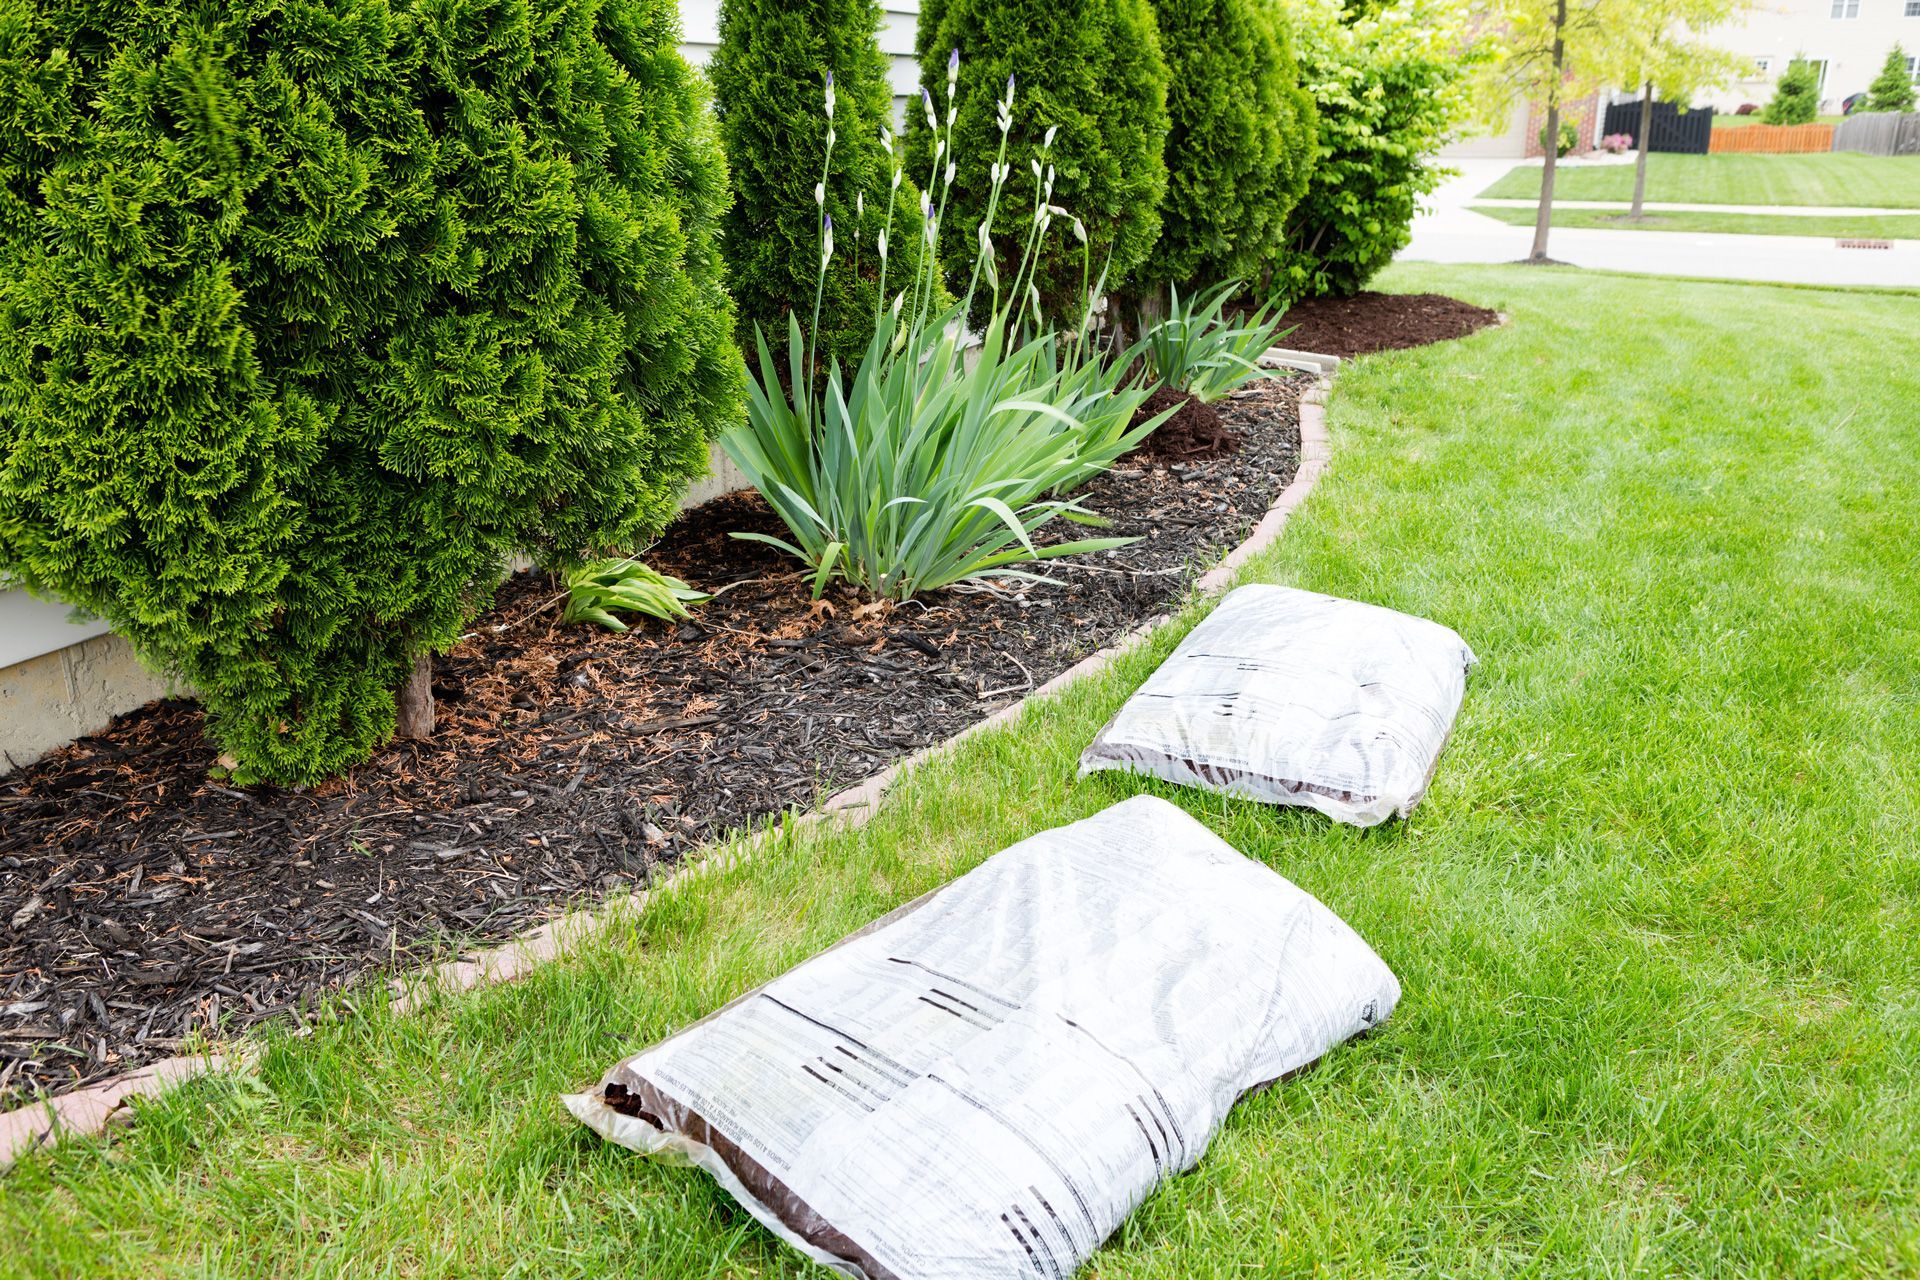 two bags of mulch are sitting on top of a lush green lawn